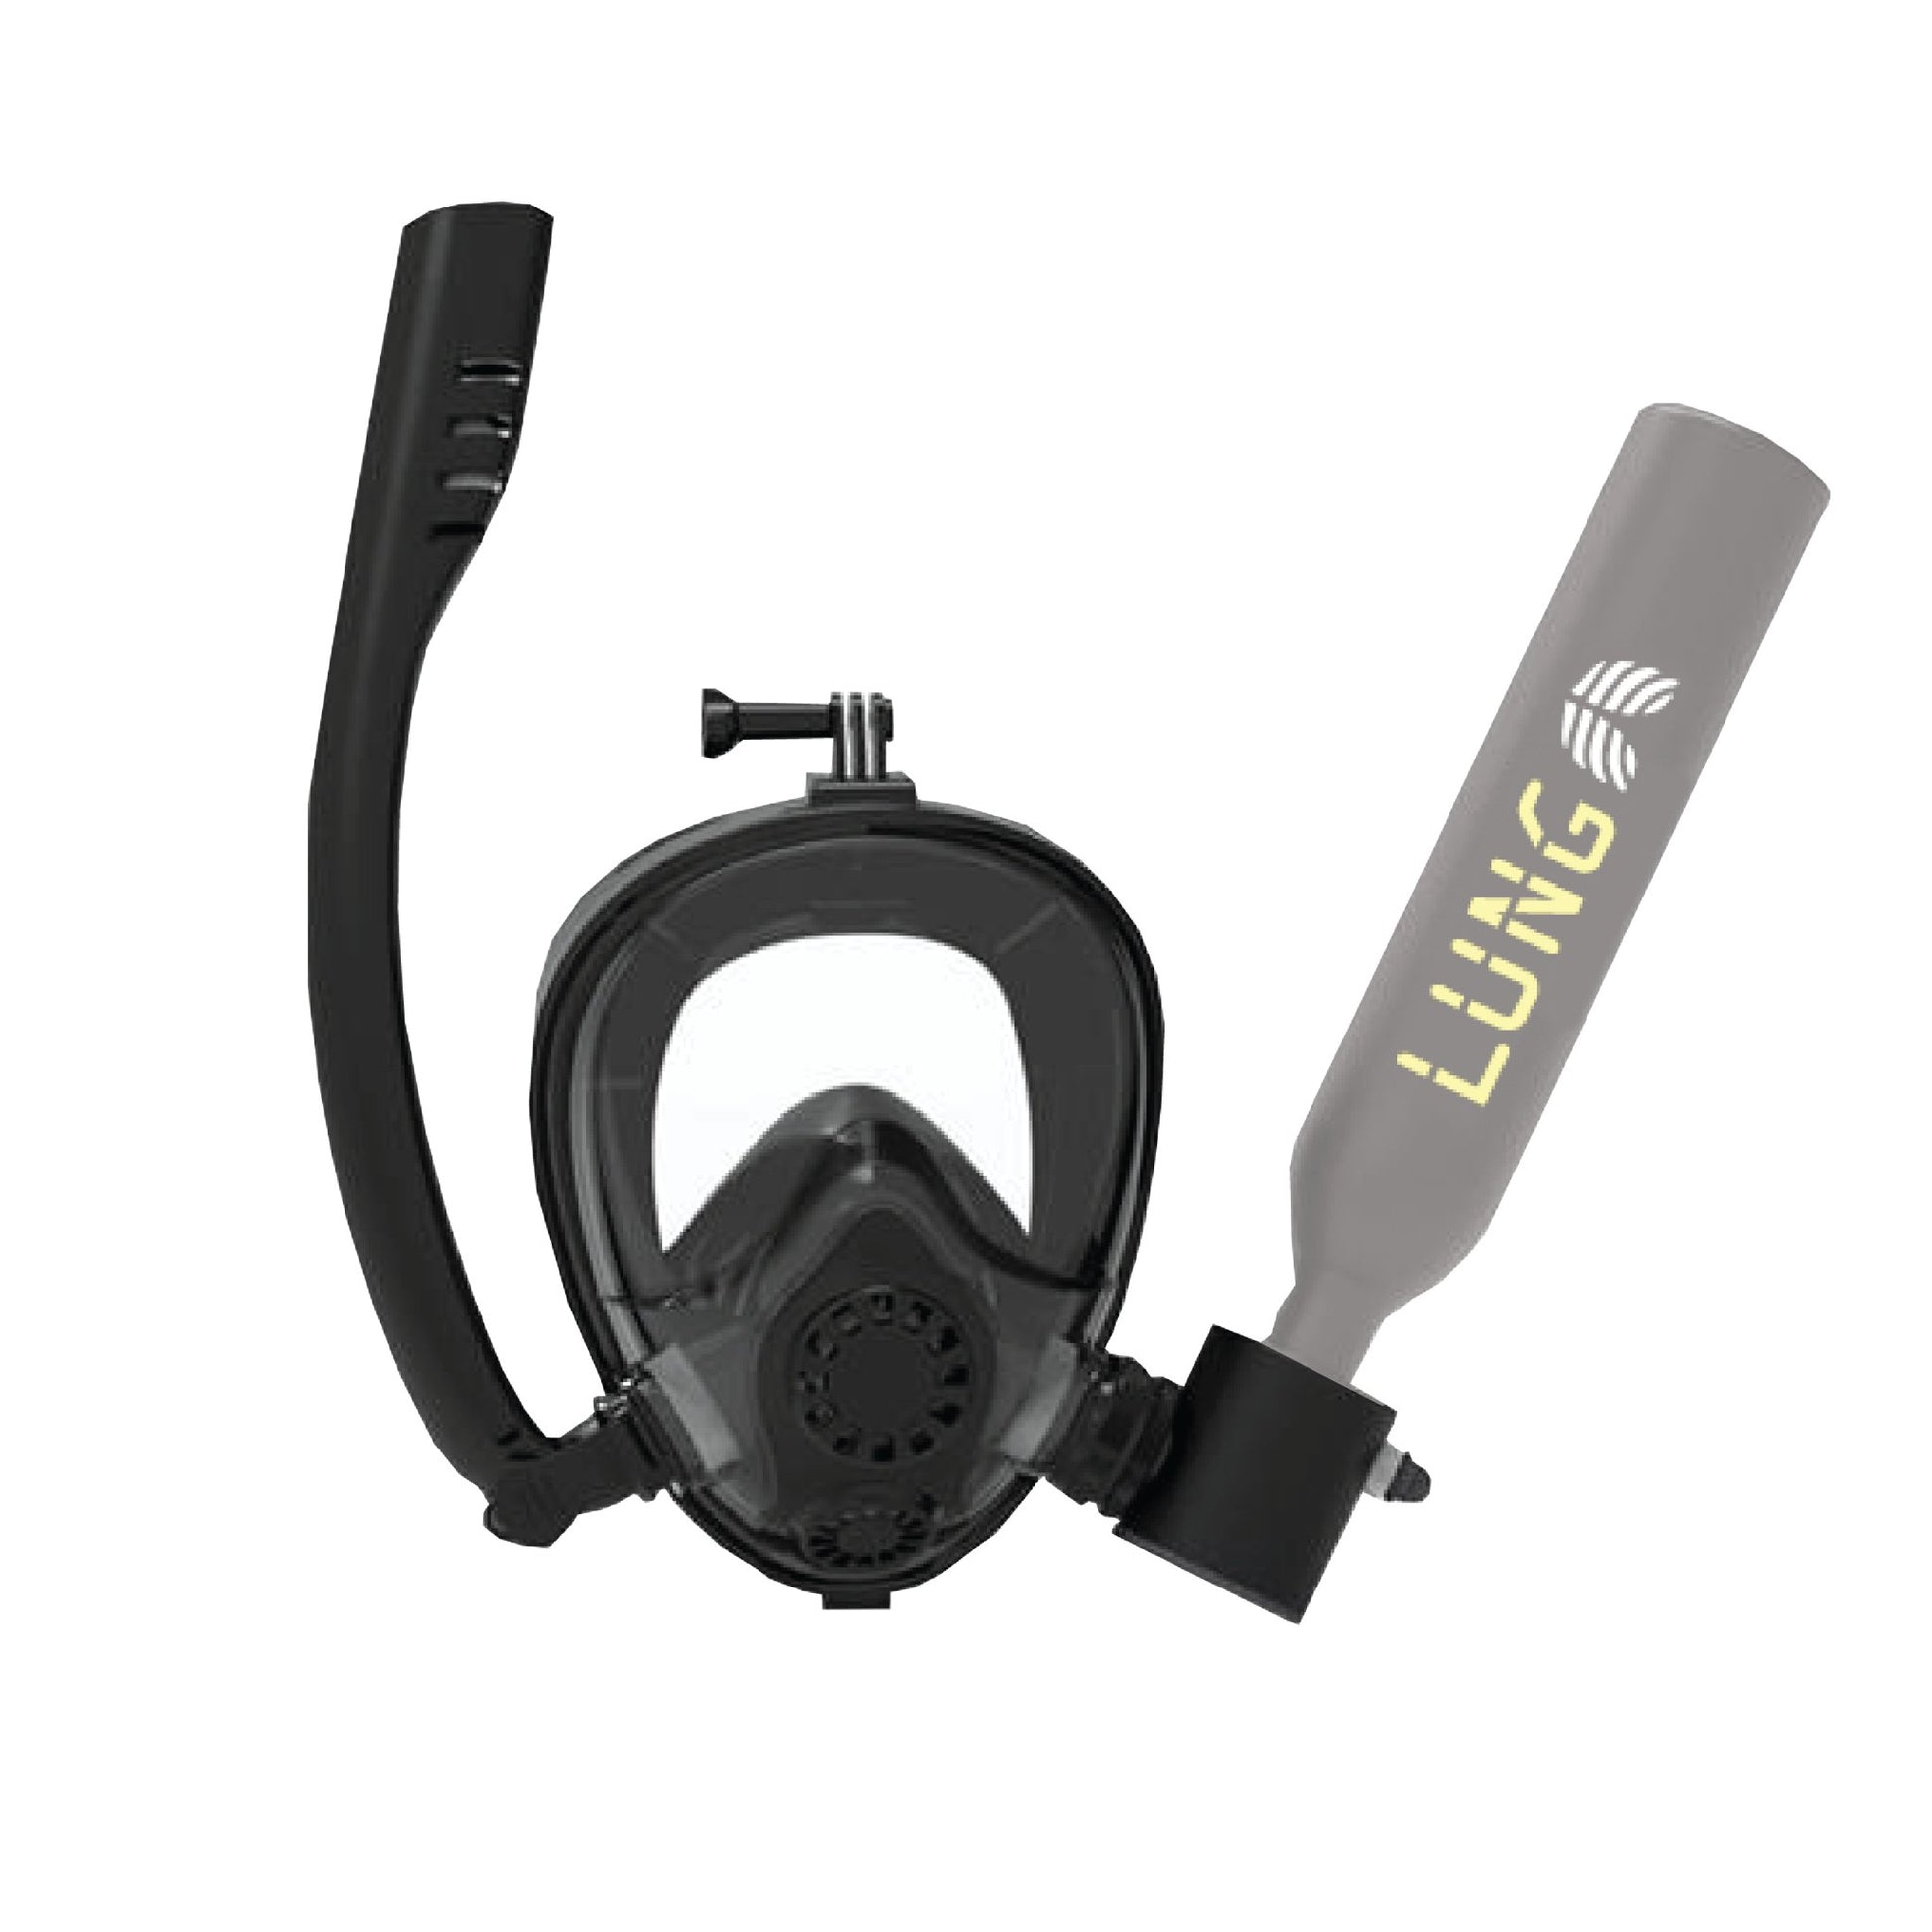 Lung Sub-Mask – Lung Tank